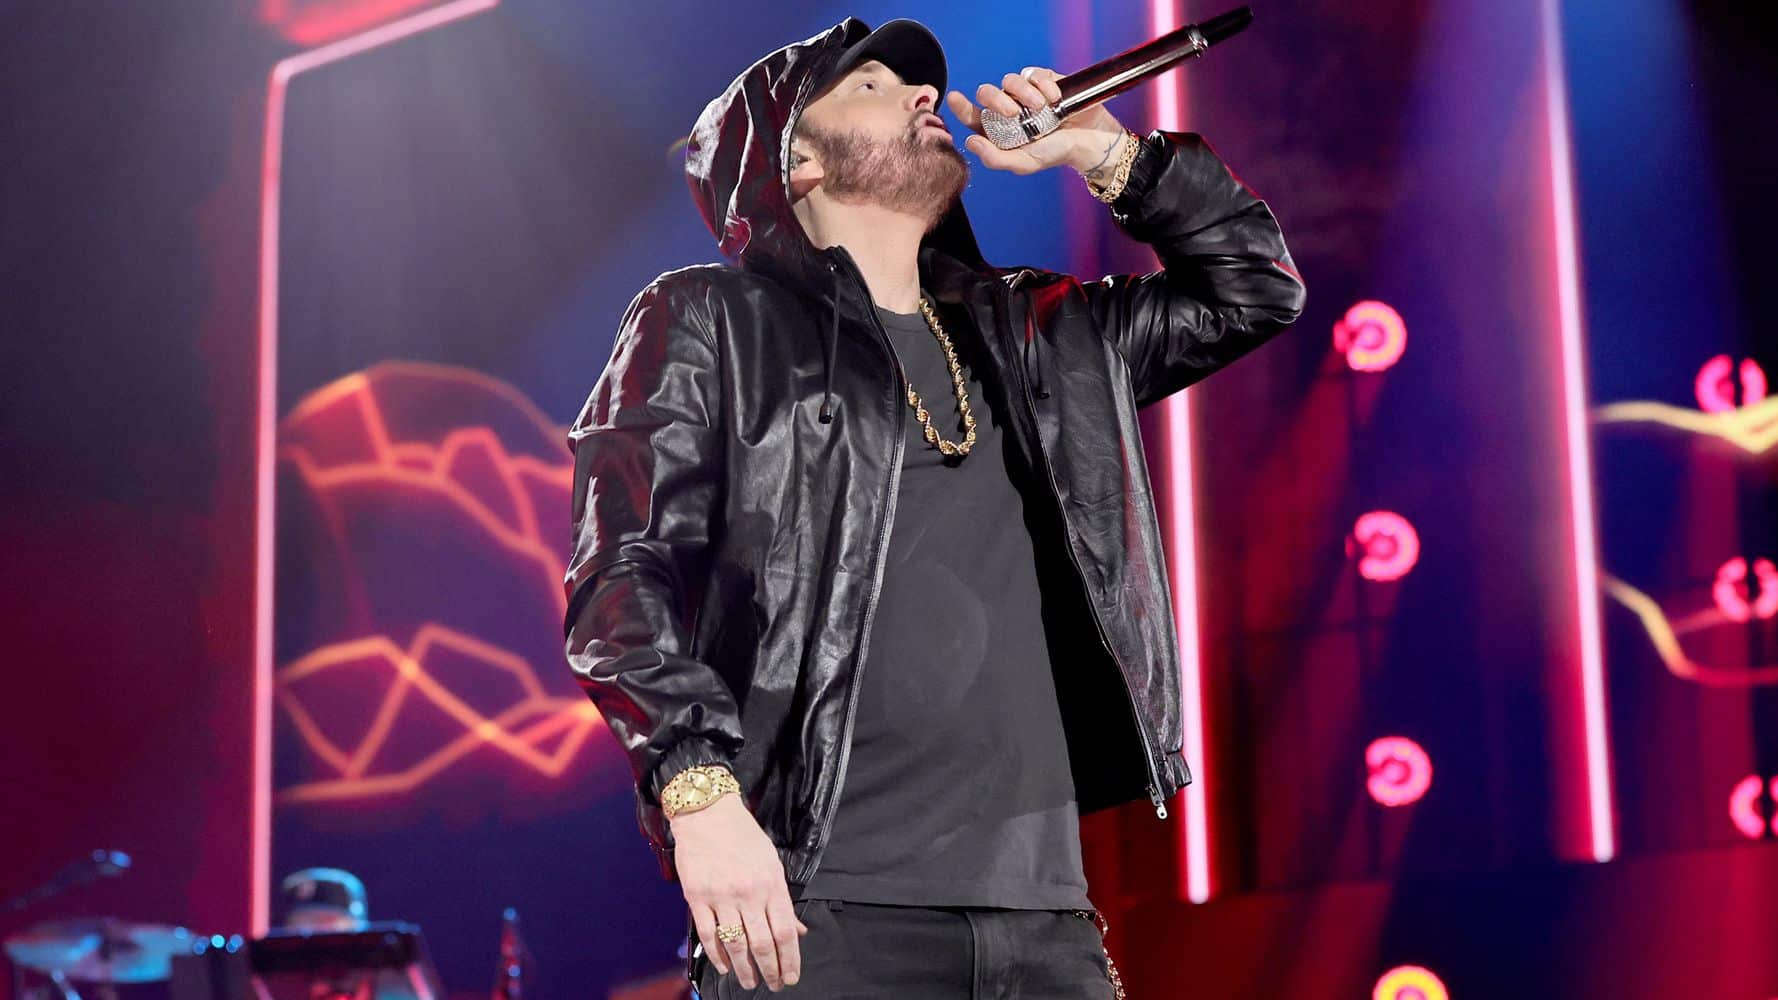 ICYMI: Eminem Honors His Hip-Hop Predecessors in Rock Hall Induction Speech